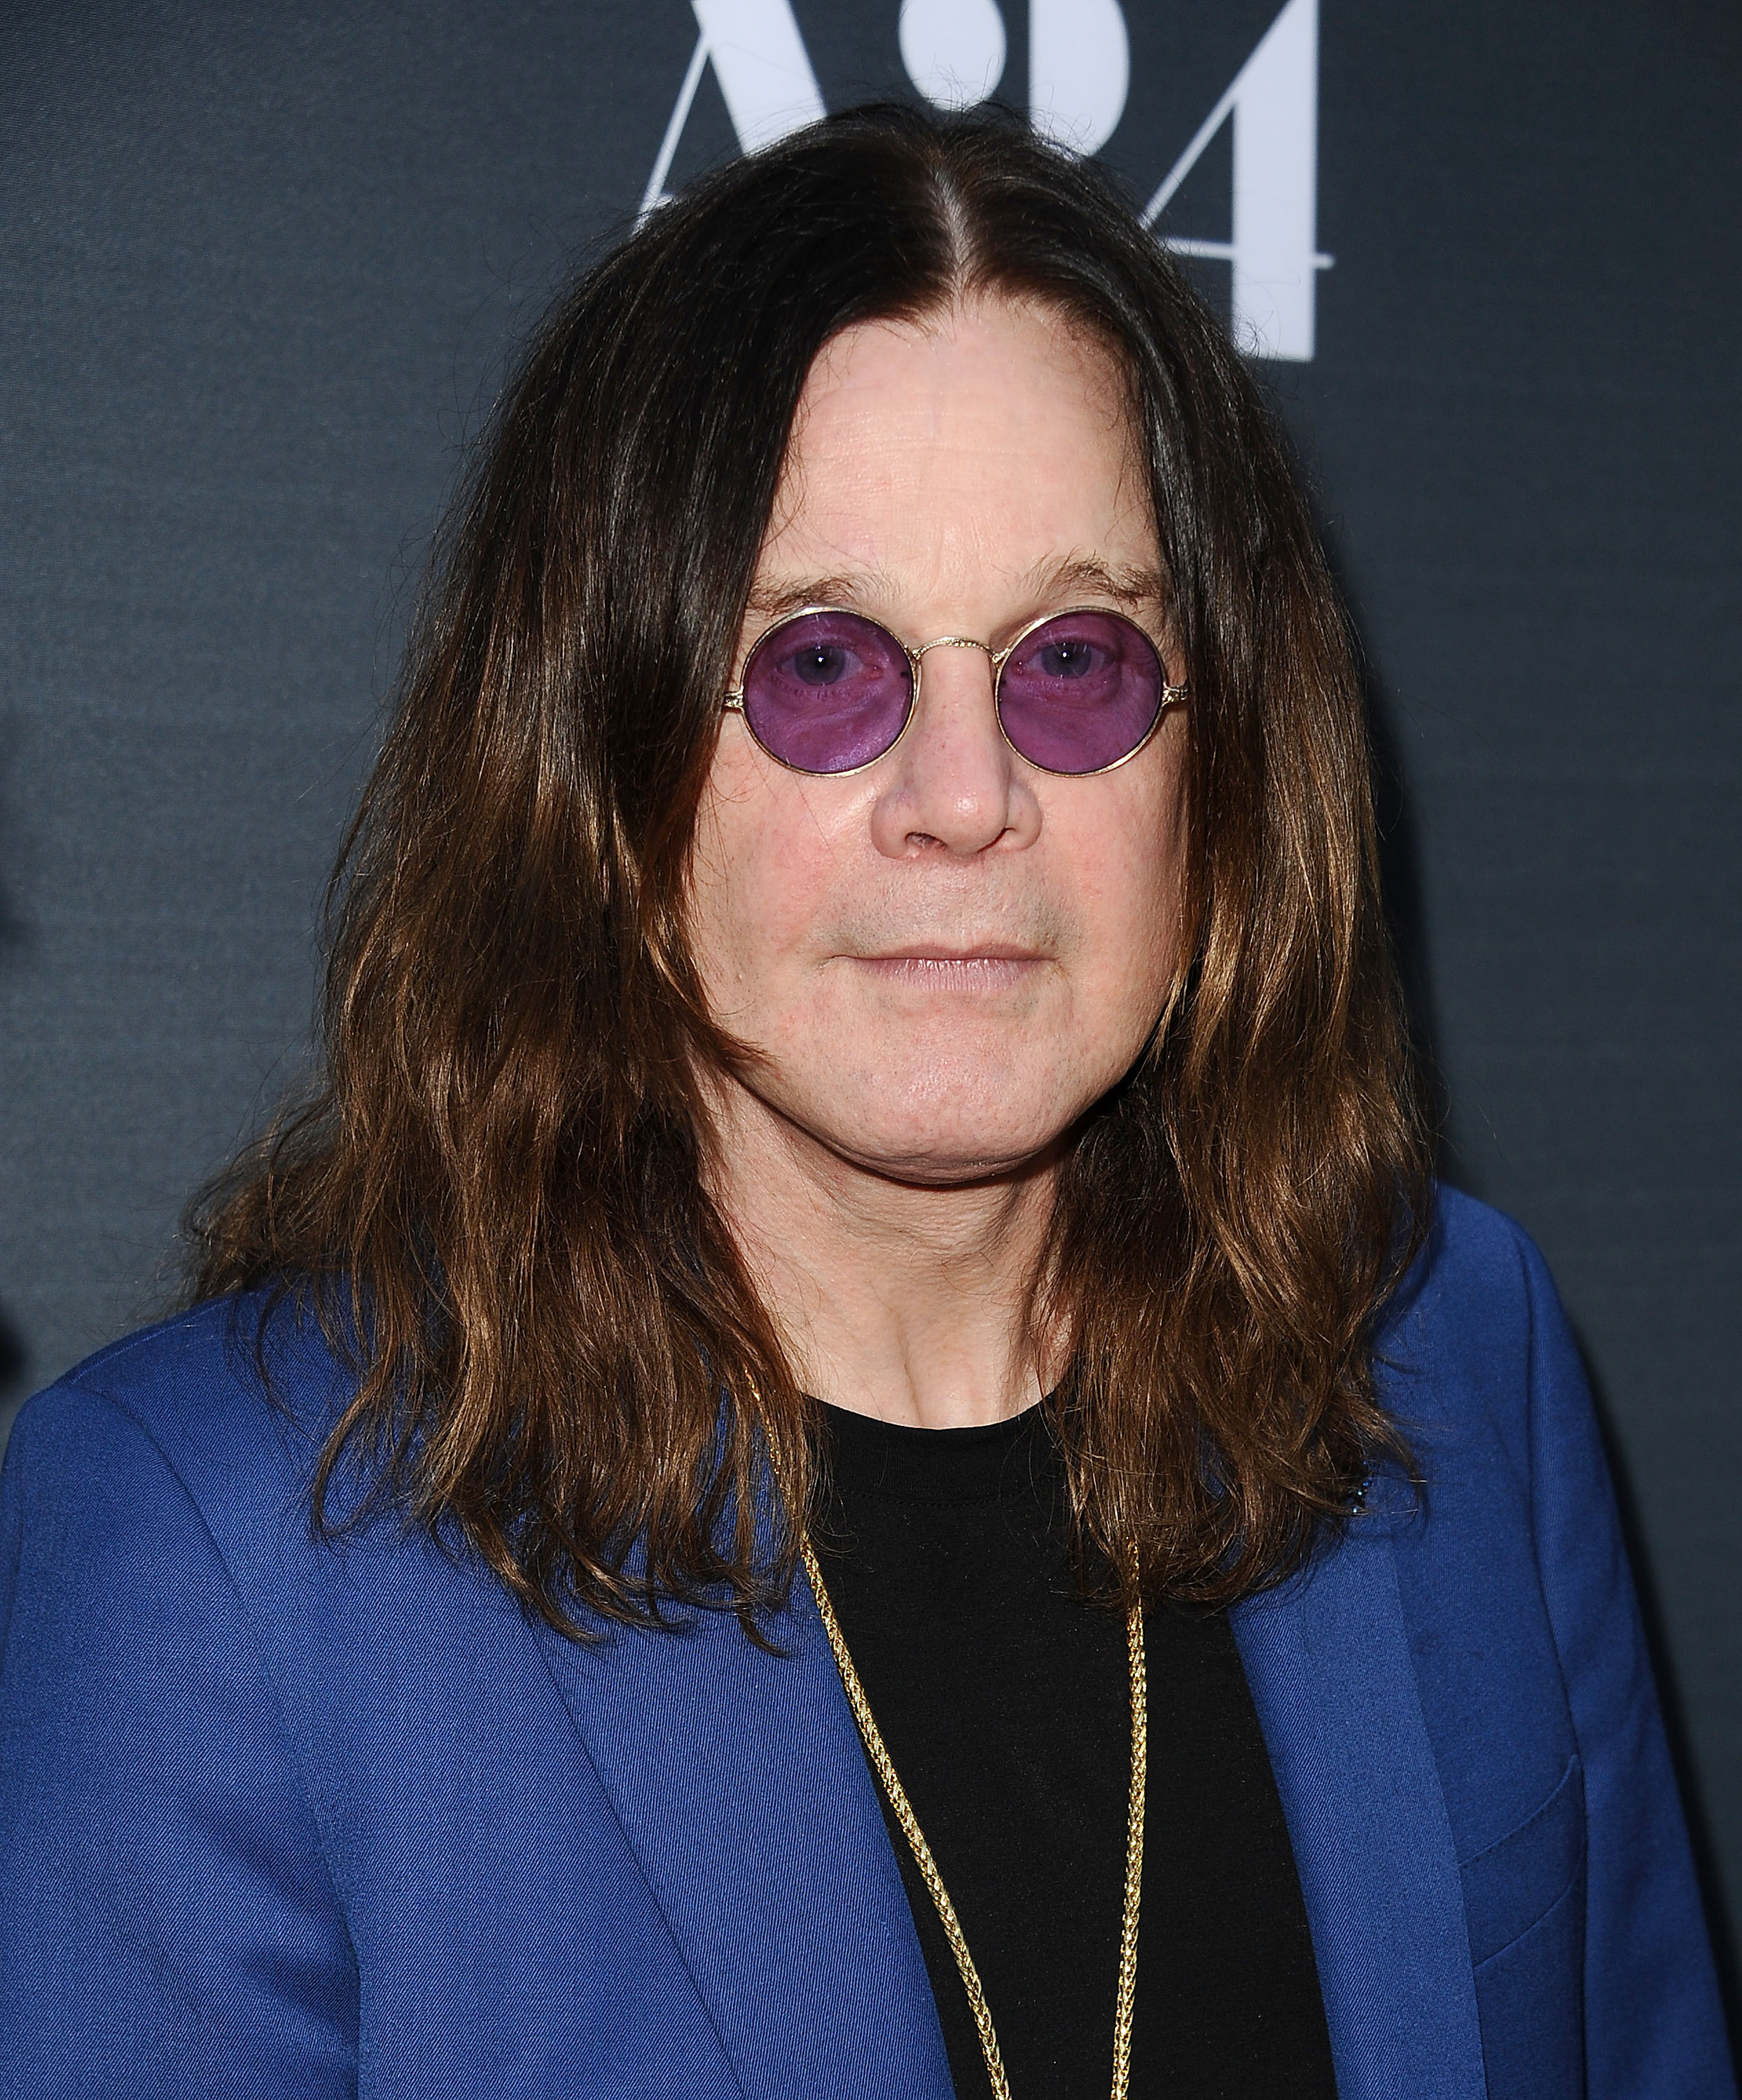 Ozzy Osbourne attends the premiere of "Amy," 2015 | Source: Getty Images